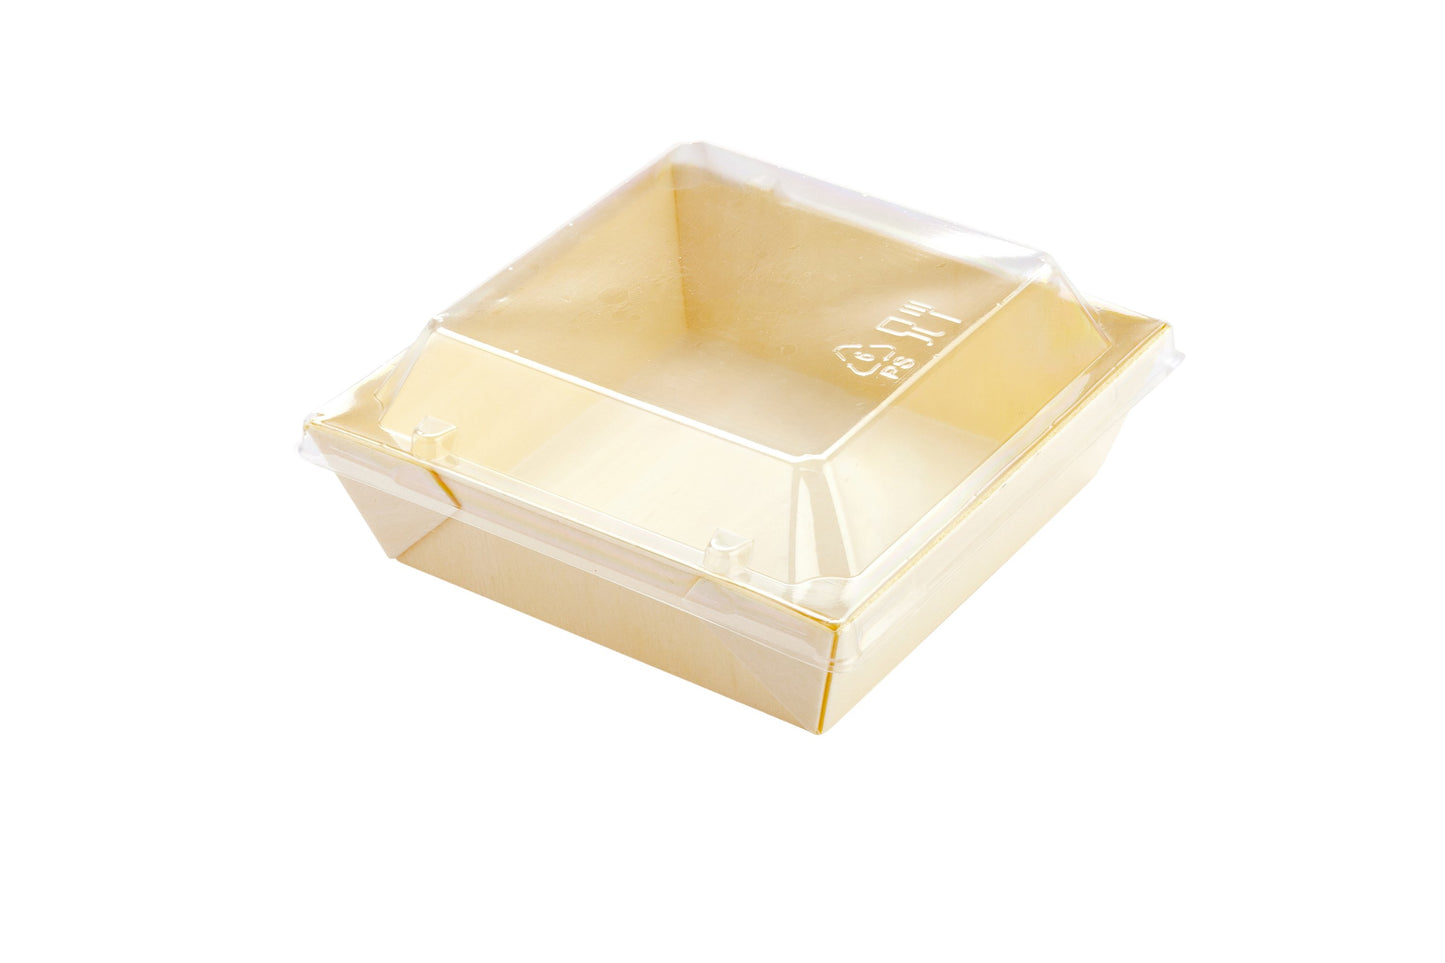 Taipei Collection Plastic Lid for Flare Square Poplar Container 100 count box